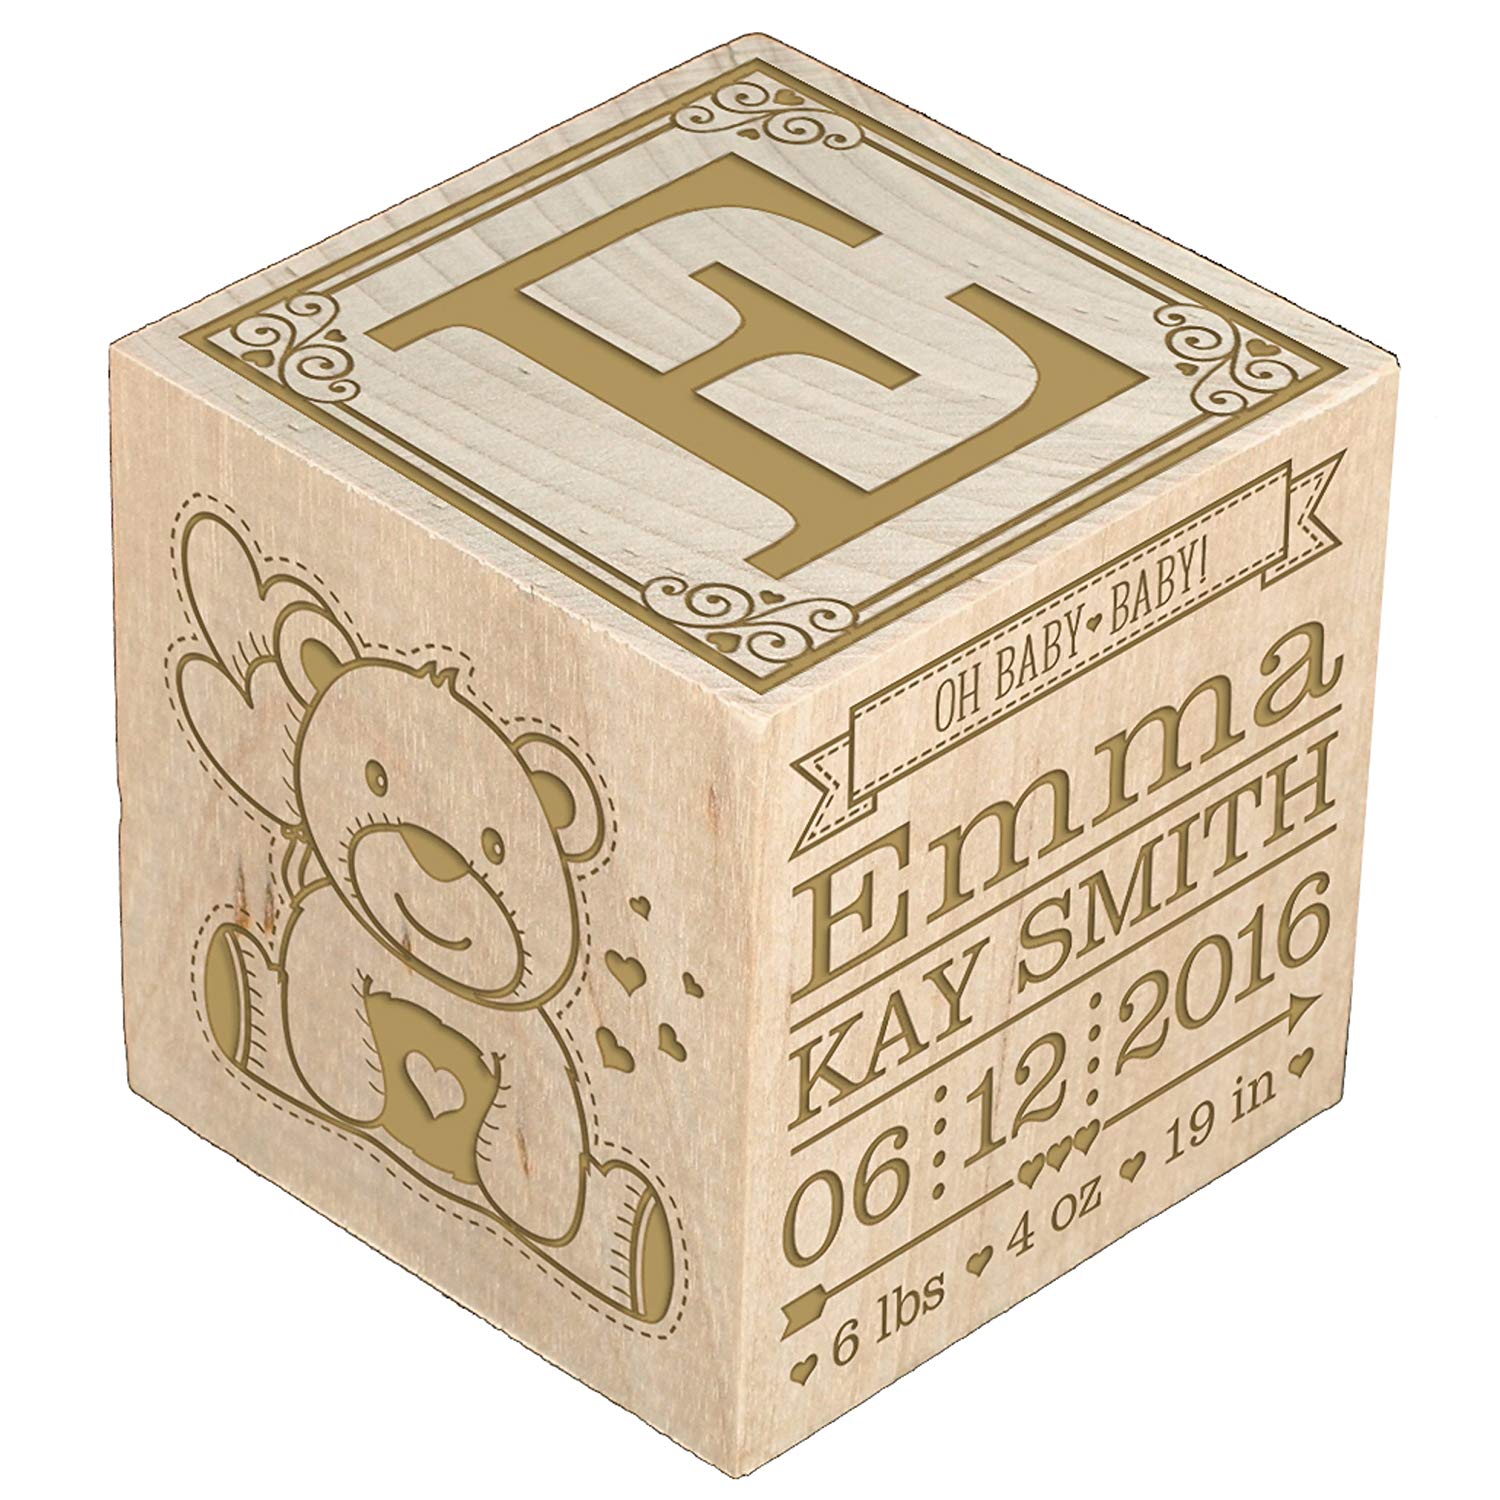 Personalized Baby Block - First We Had Each Other - LifeSong Milestones